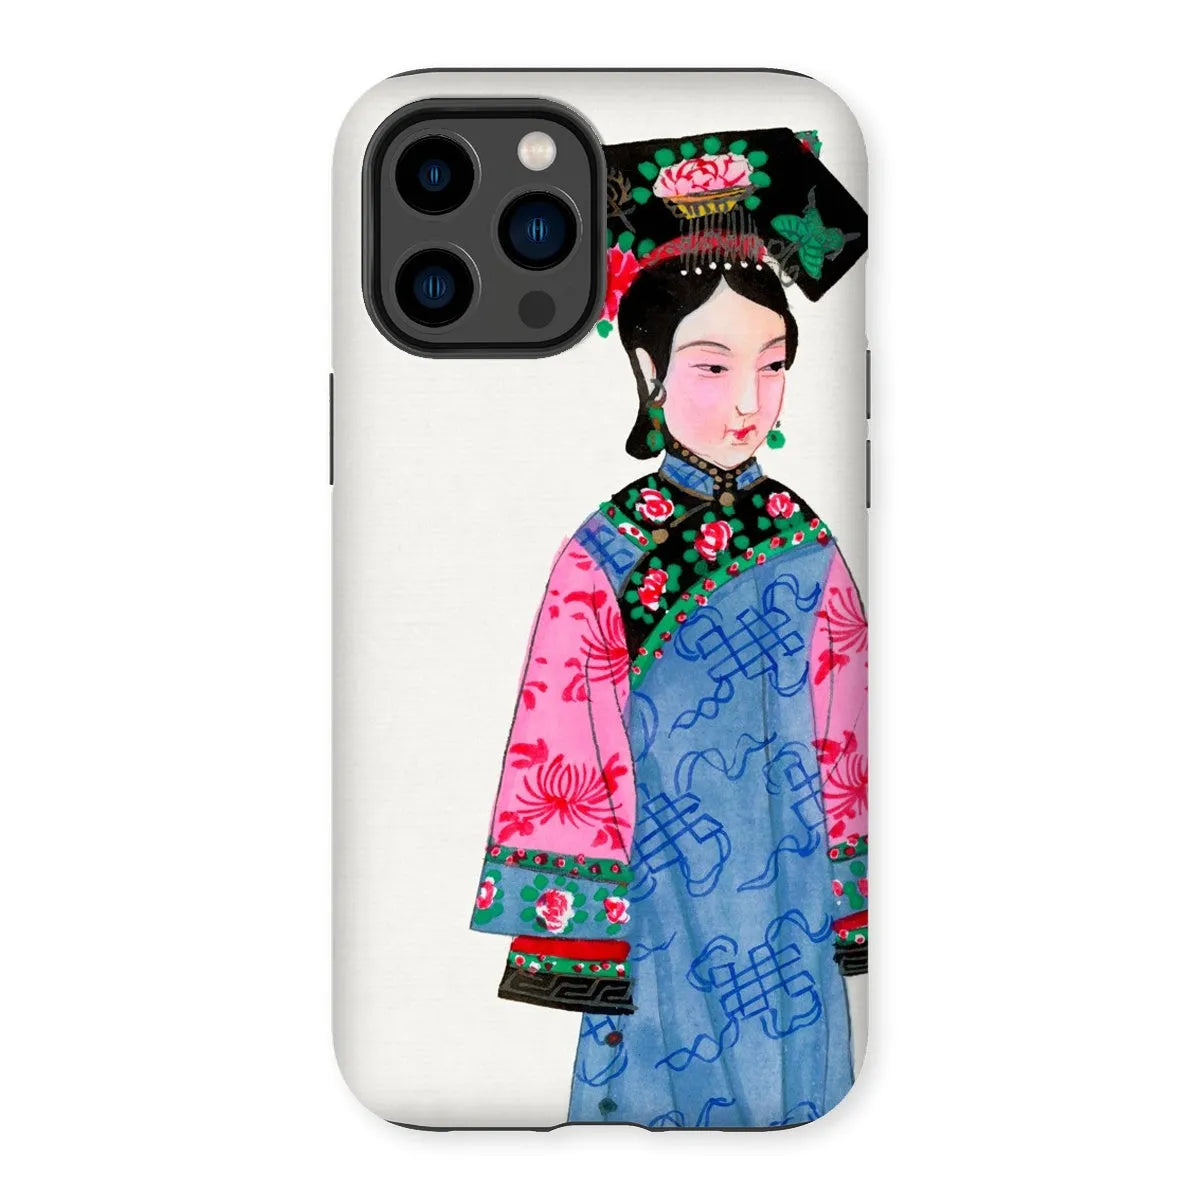 Noblewoman Too - Manchu Aesthetic Art Phone Case - Iphone 14 Pro Max / Matte - Mobile Phone Cases - Aesthetic Art